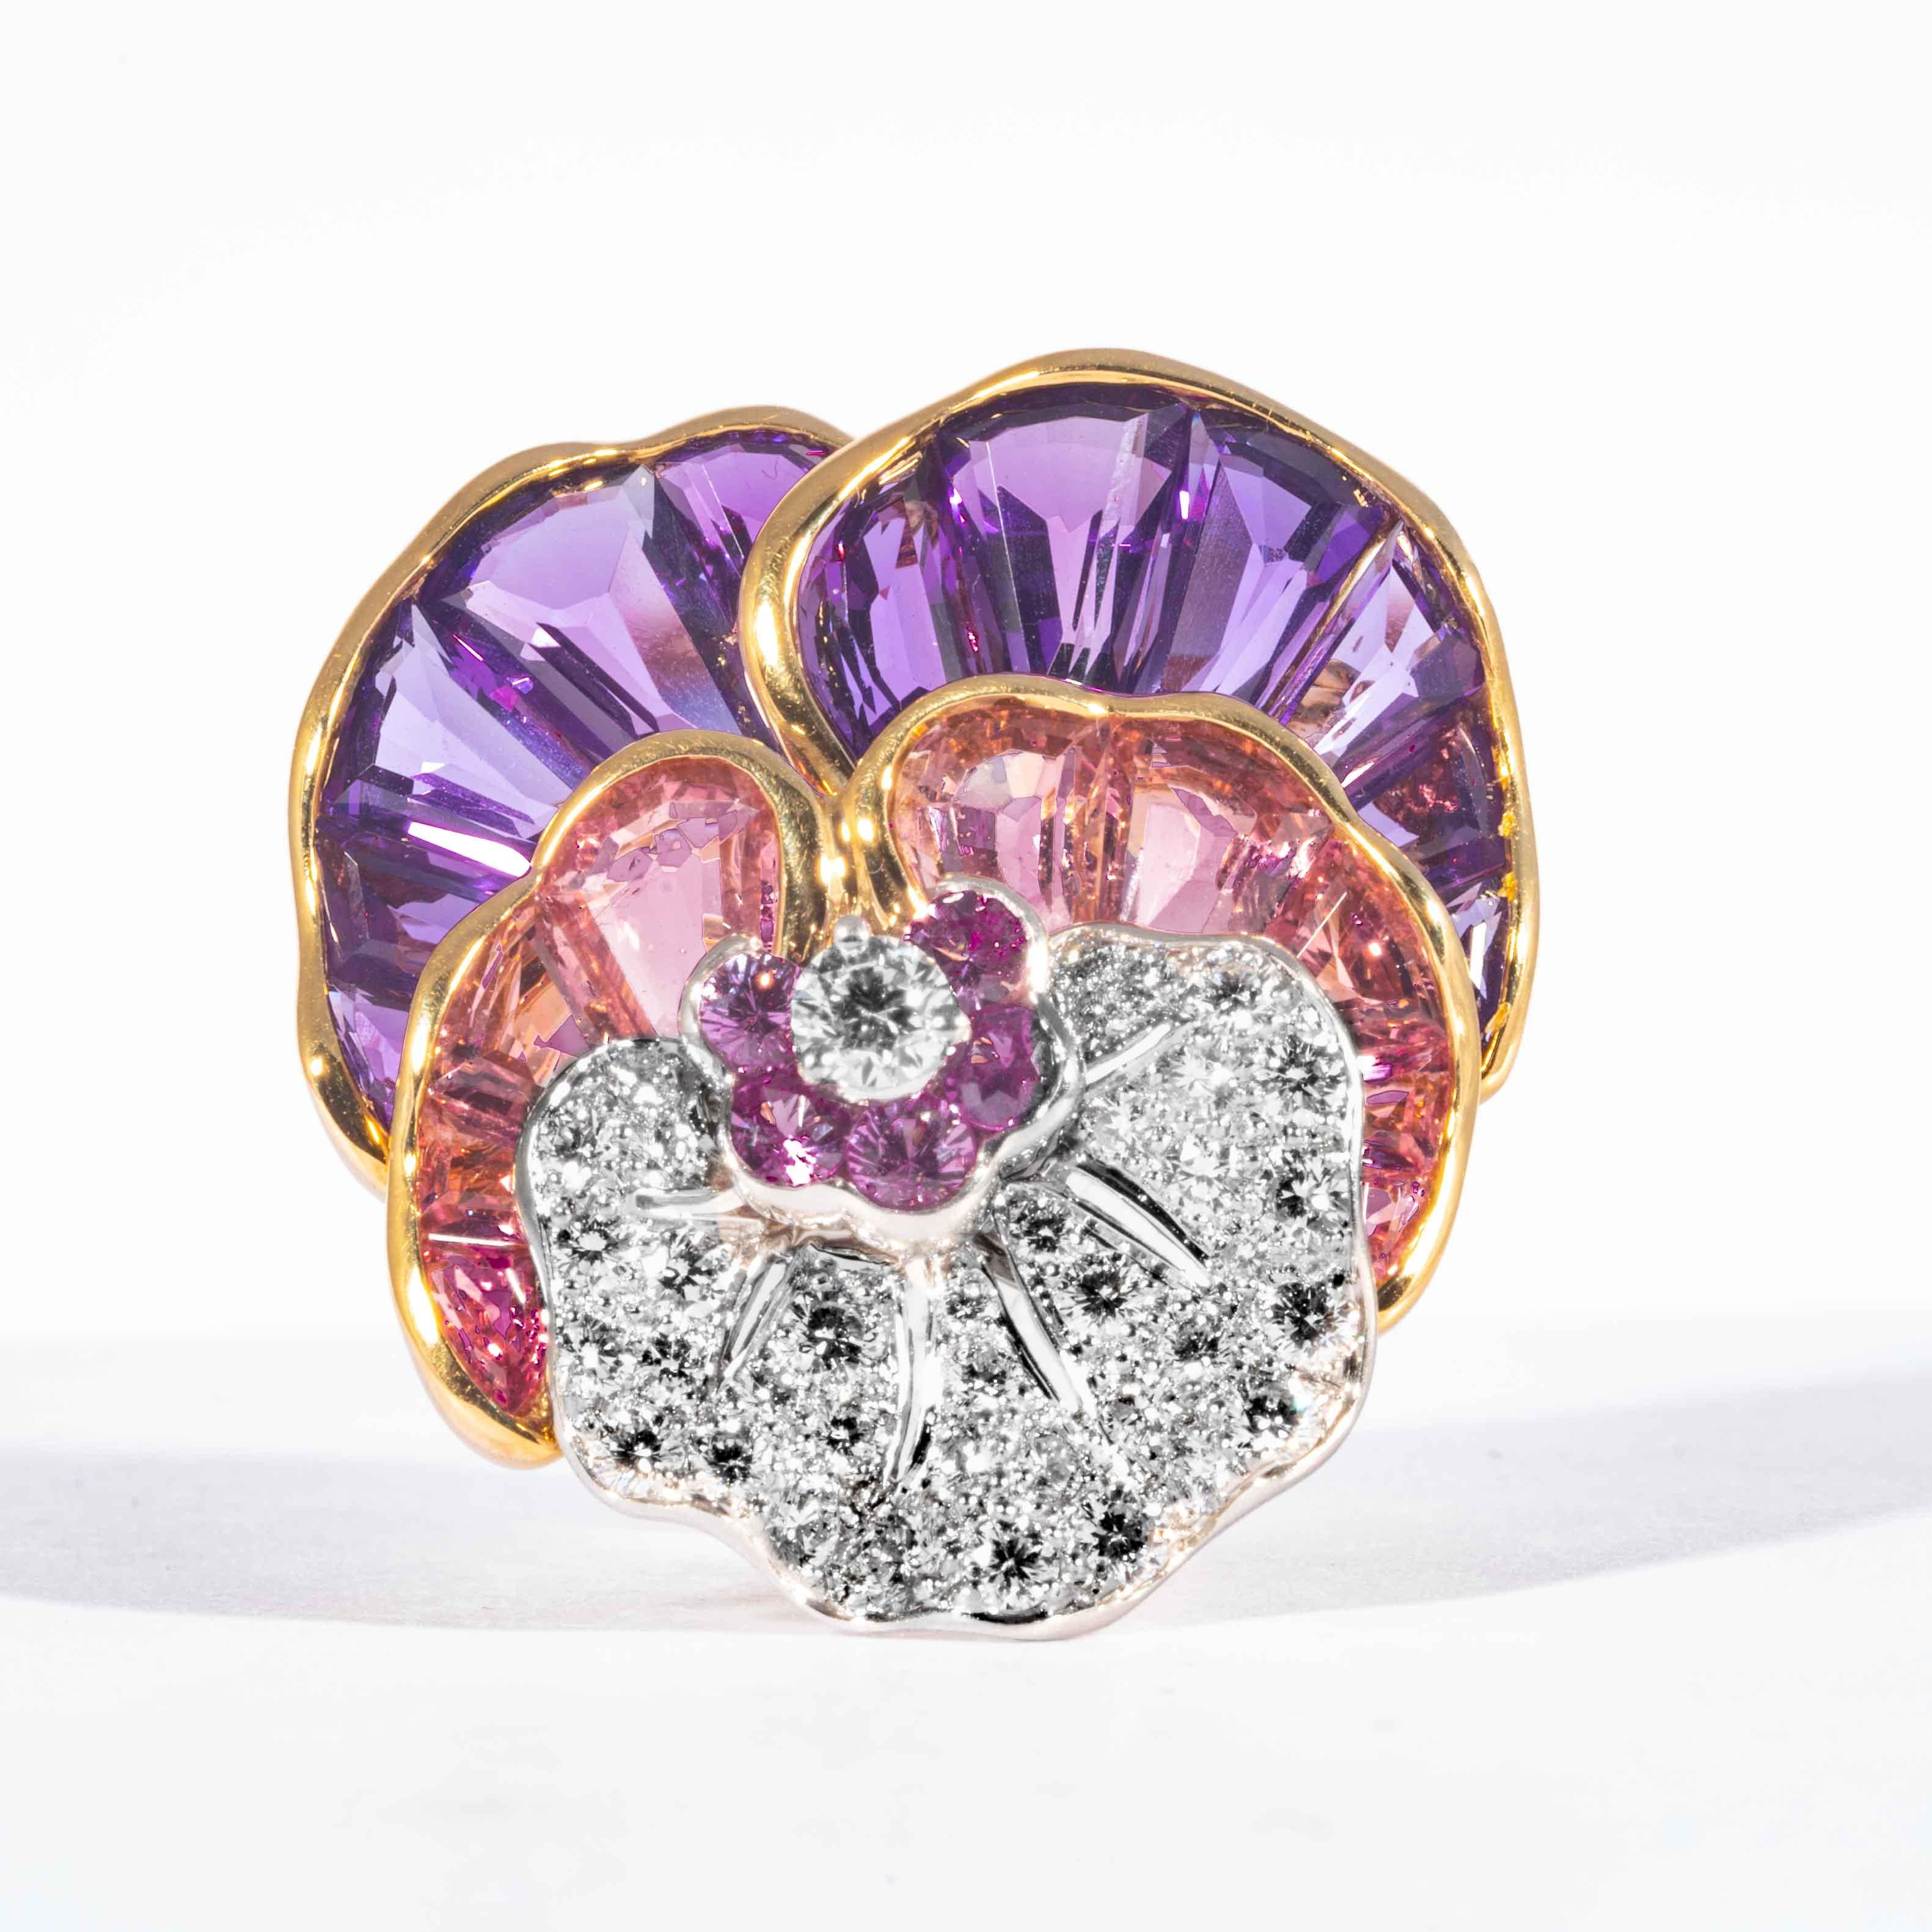 Purple Amethyst, Pink Topaz, Purplish Magenta Tourmaline, and sparkling white diamonds come together in a beautiful display of color to form a unique rendition of Oscar Heyman Brother's icon pansy pin. Created in 18kt yellow gold and platinum. This